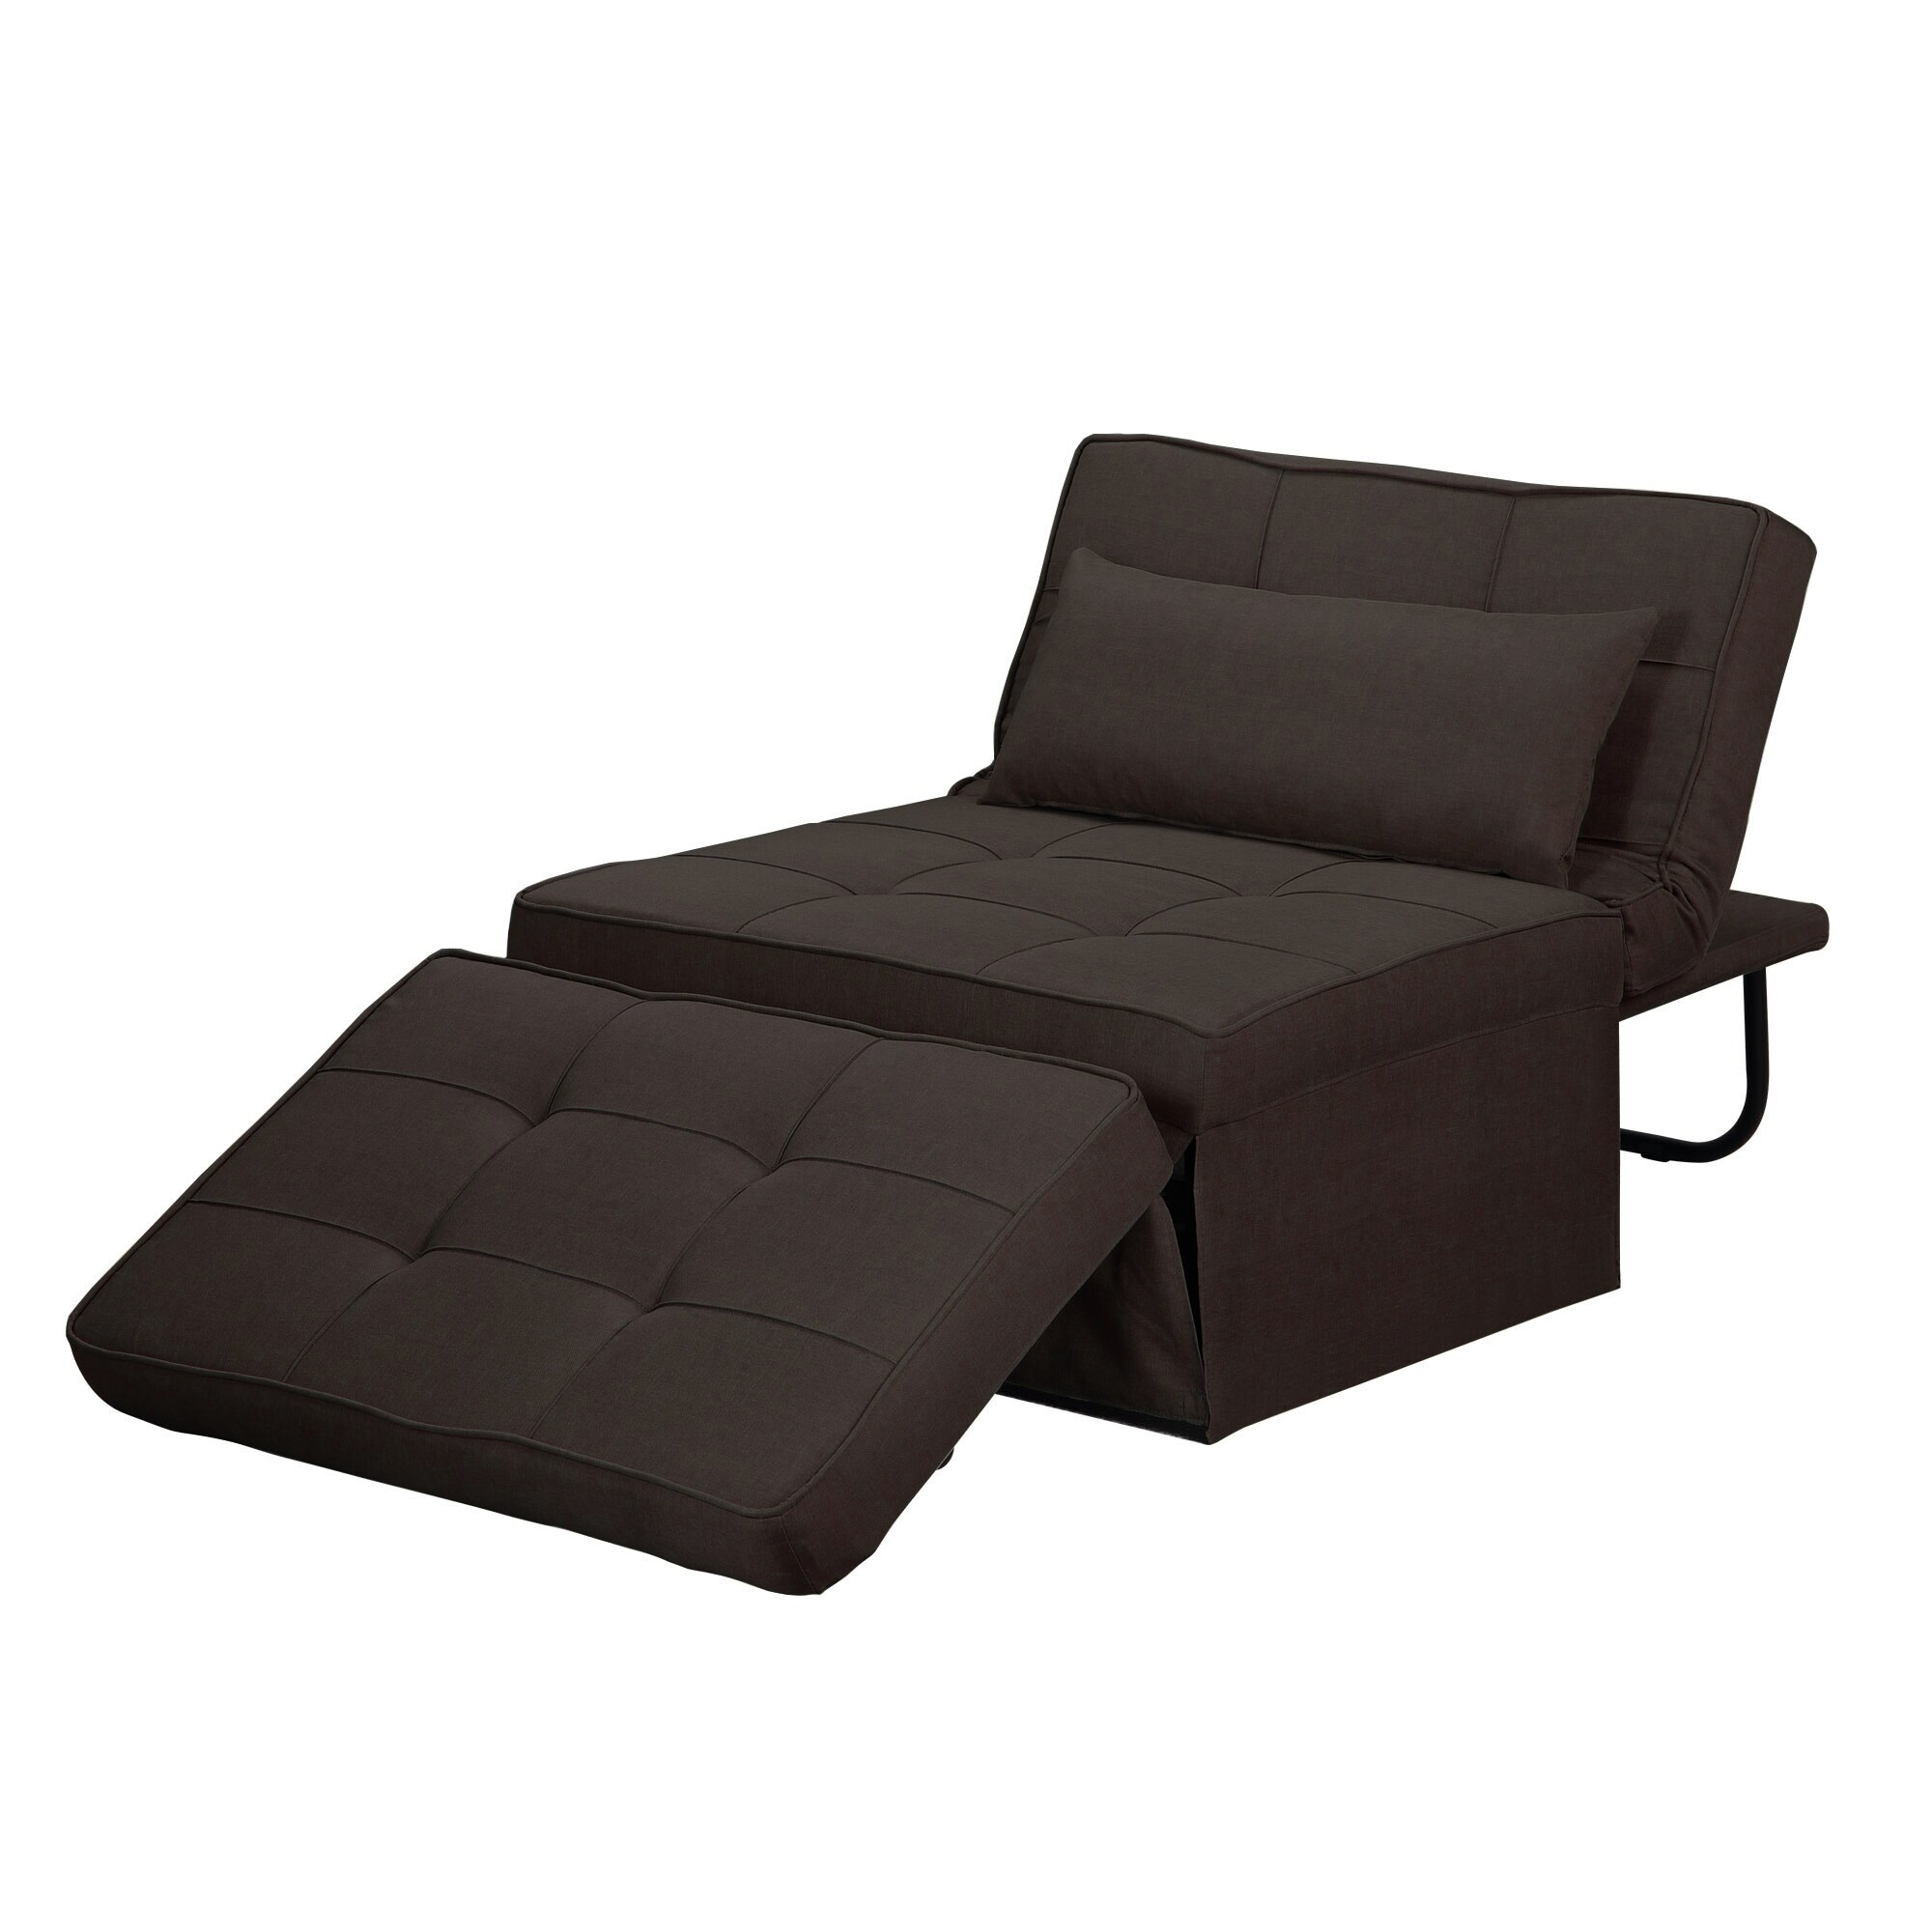 Foldable Sofa Bed Chair Sleeper Chair Ottoman Chaise Lounge Adjustable  Backrest 